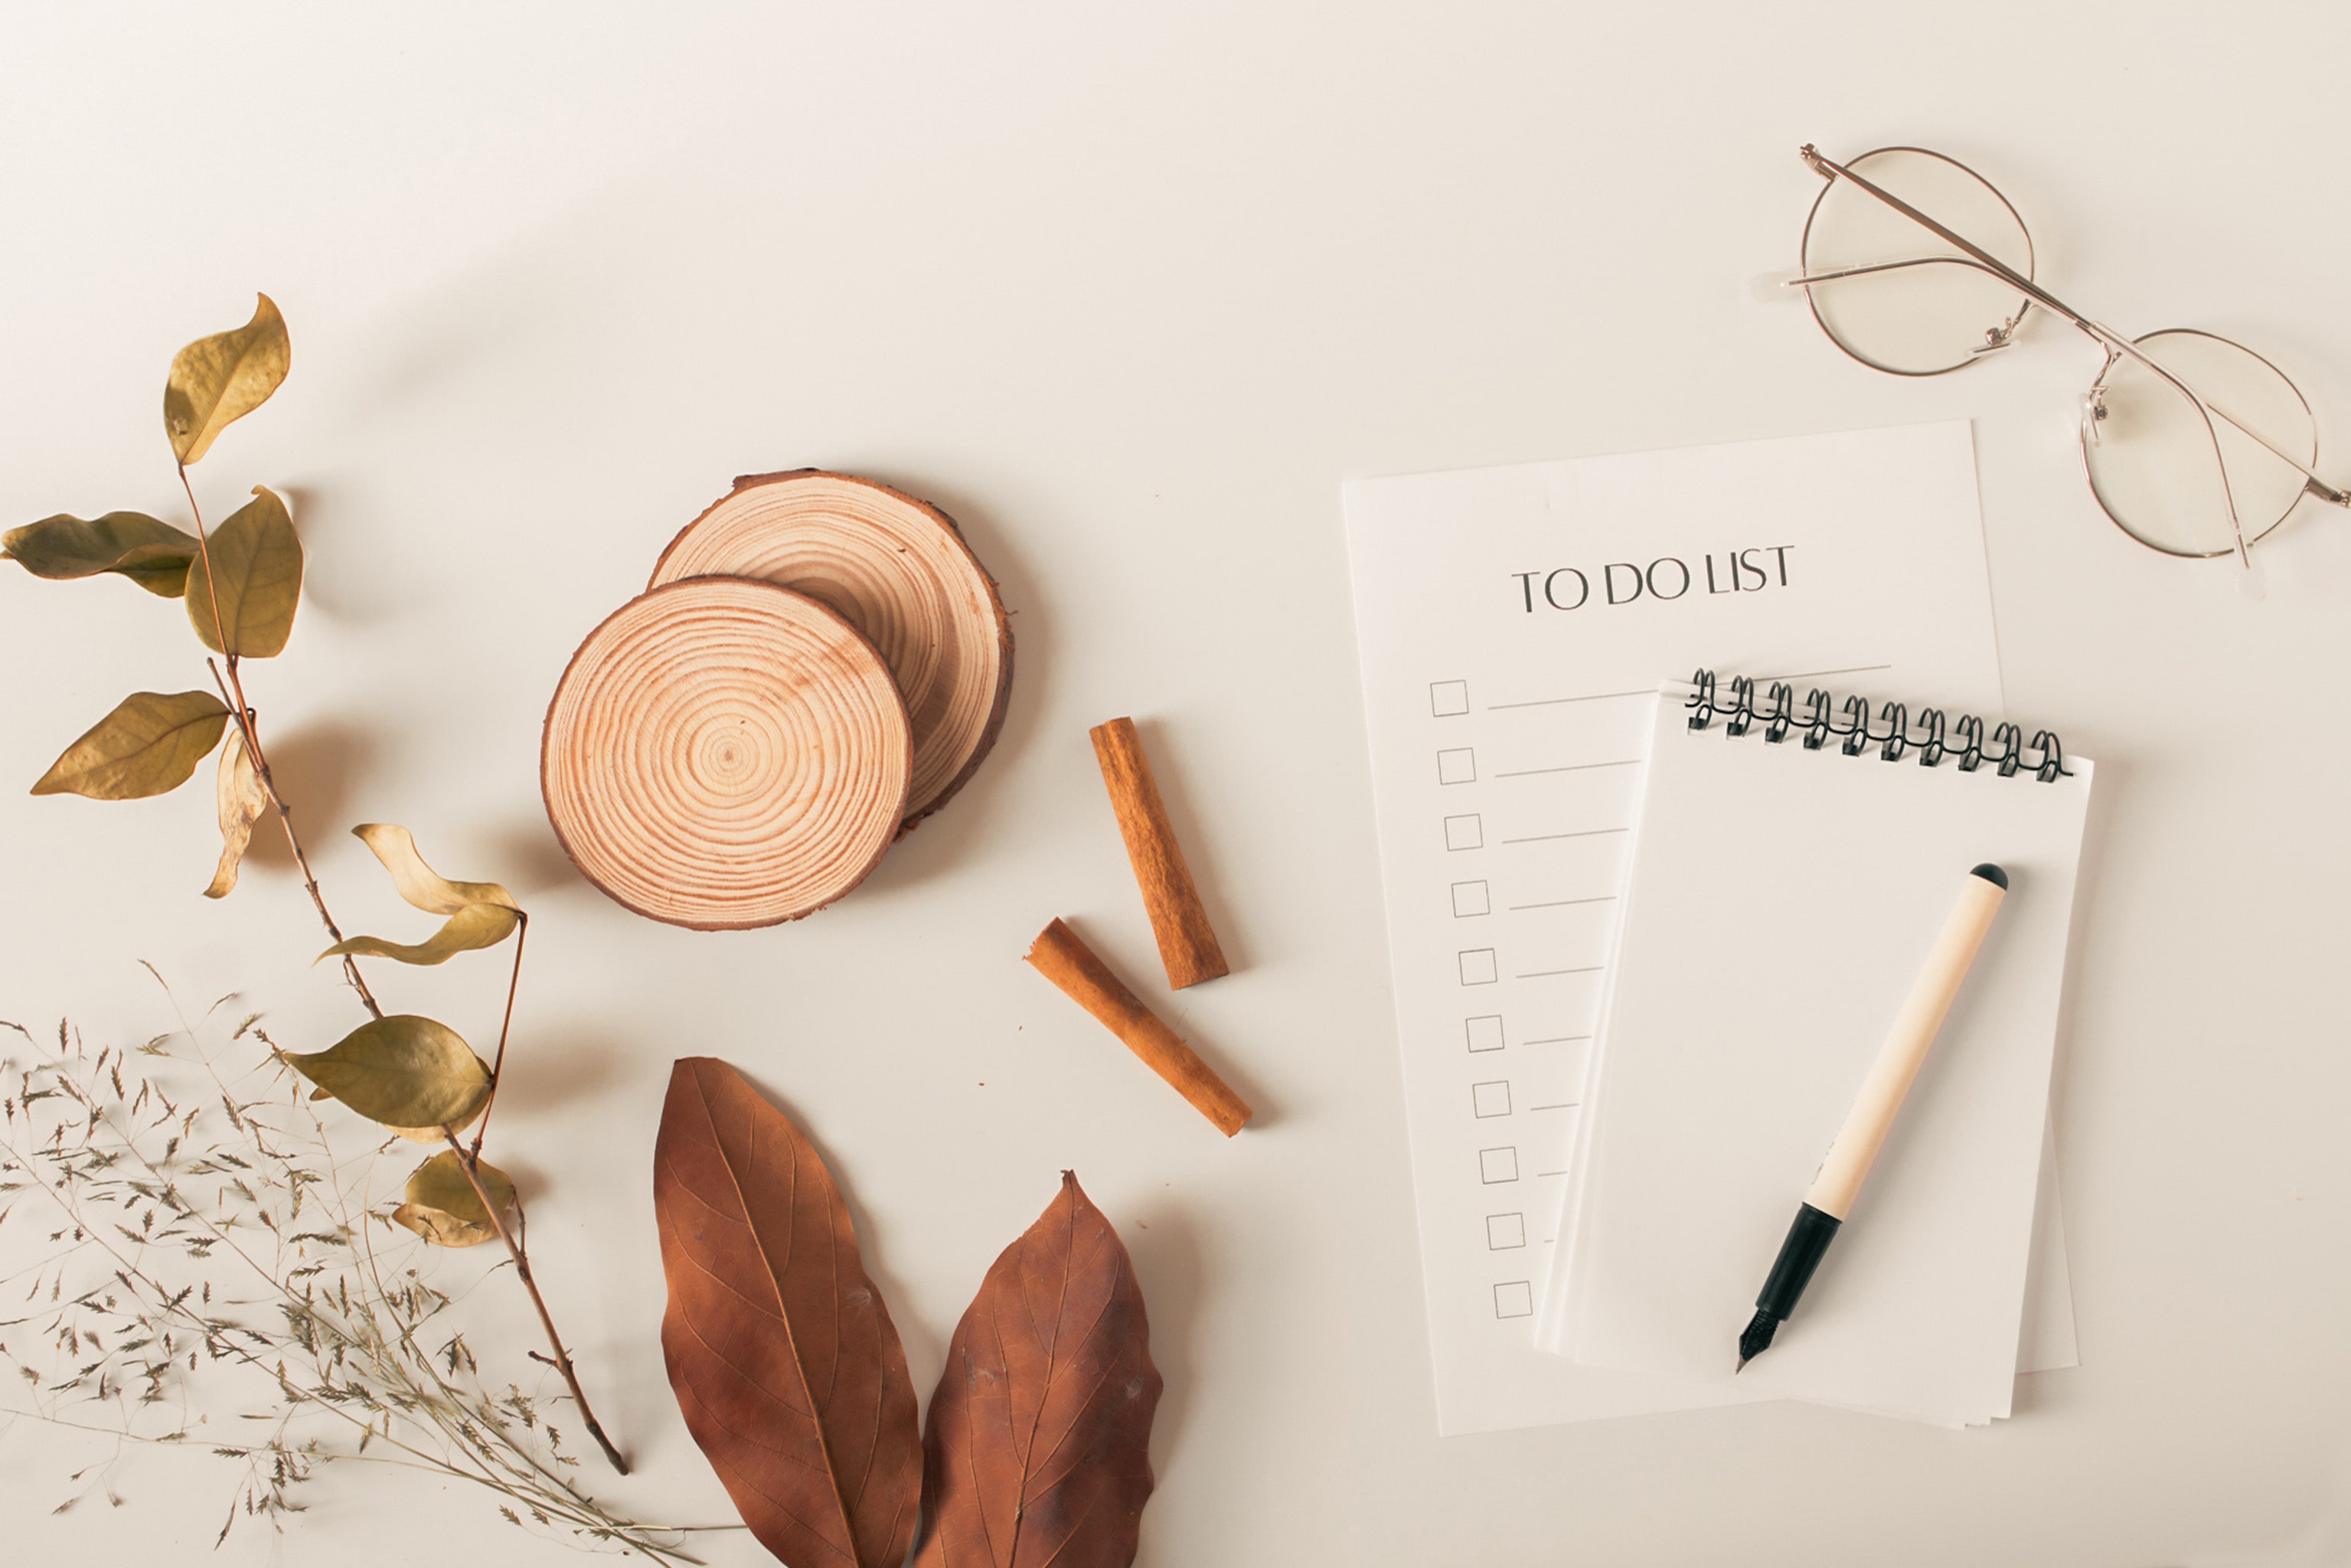 A to do list, note pad, pen and pair of glasses on a white background. Dried leaves and grass seeds on stems are scattered around the image too.